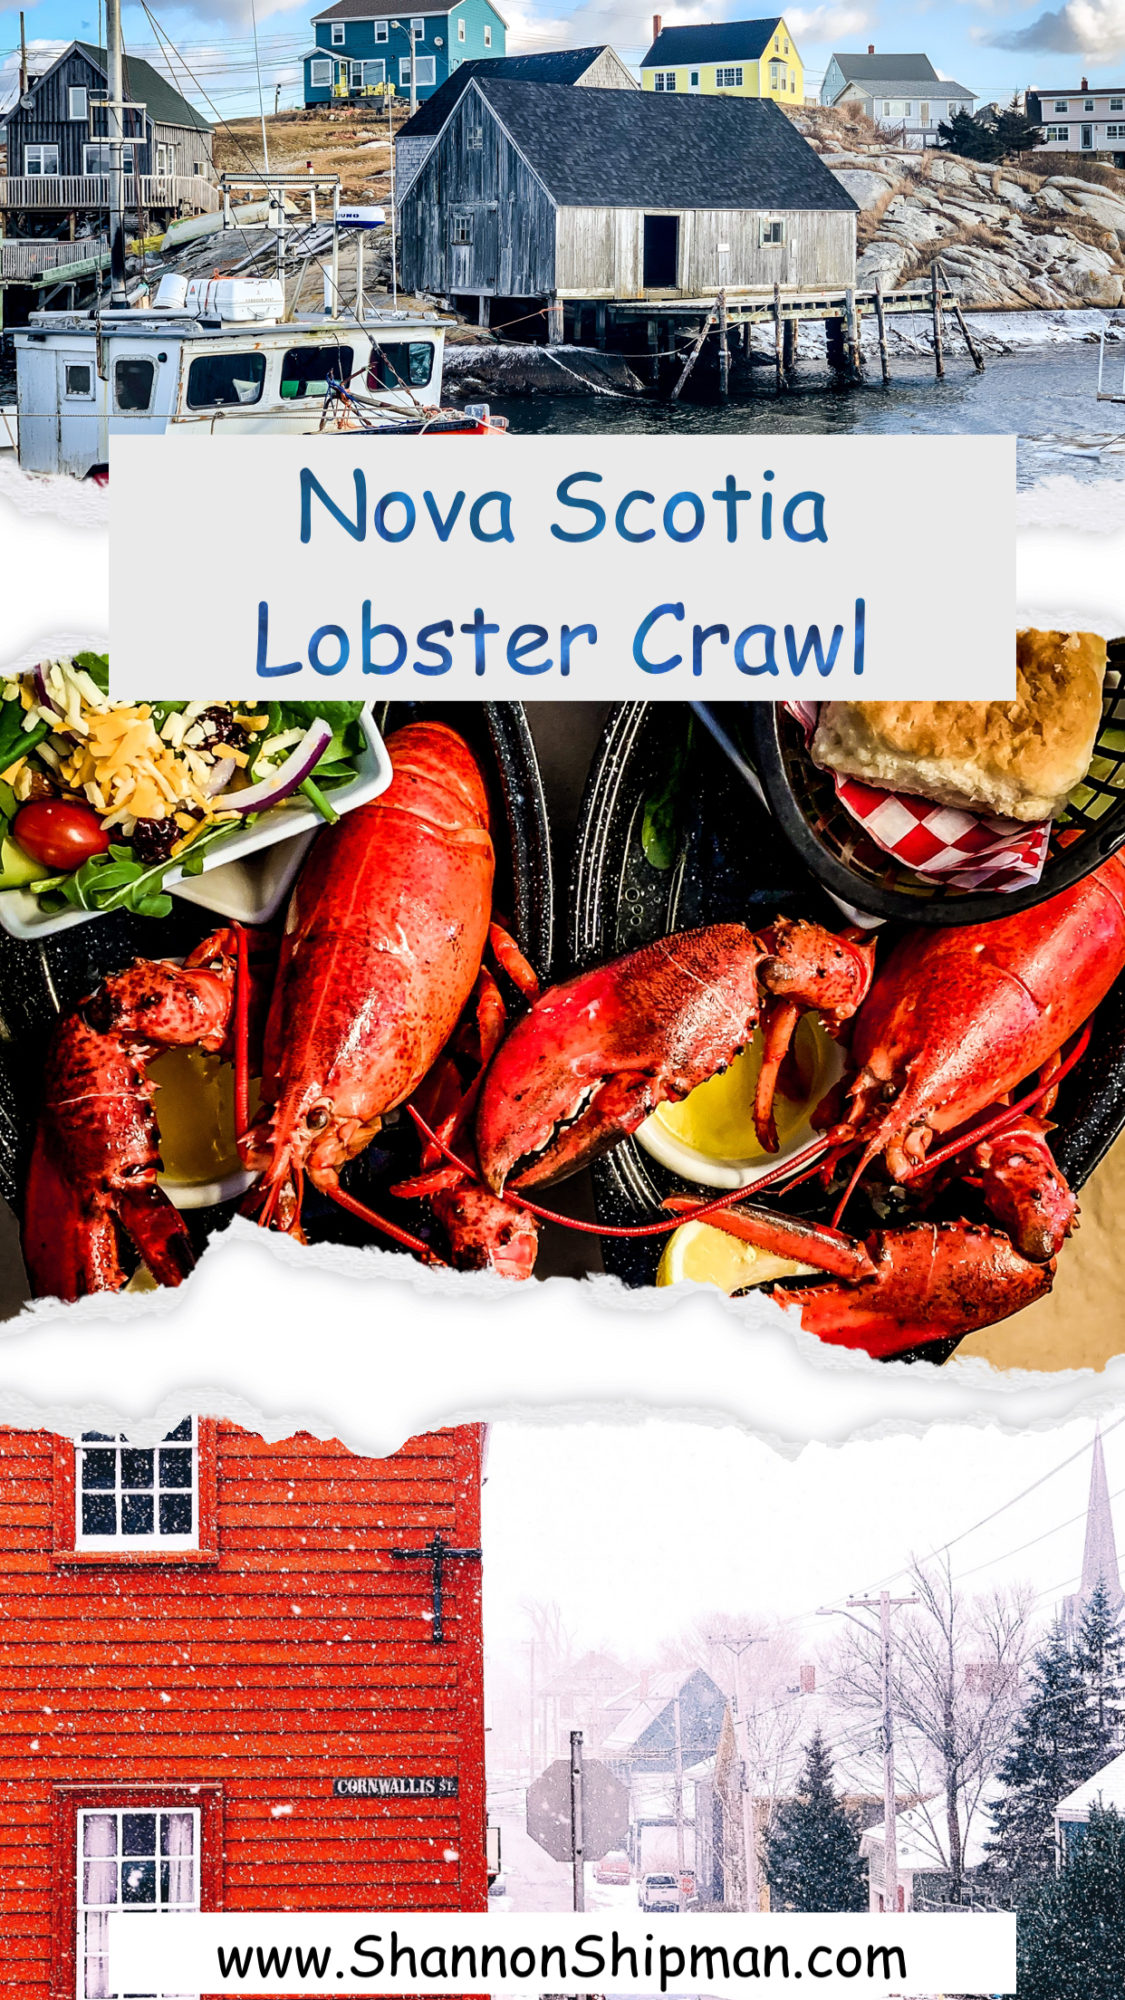 Nova Scotia Lobster Crawl review featured by top travel blogger and photographer, Shannon Shipman